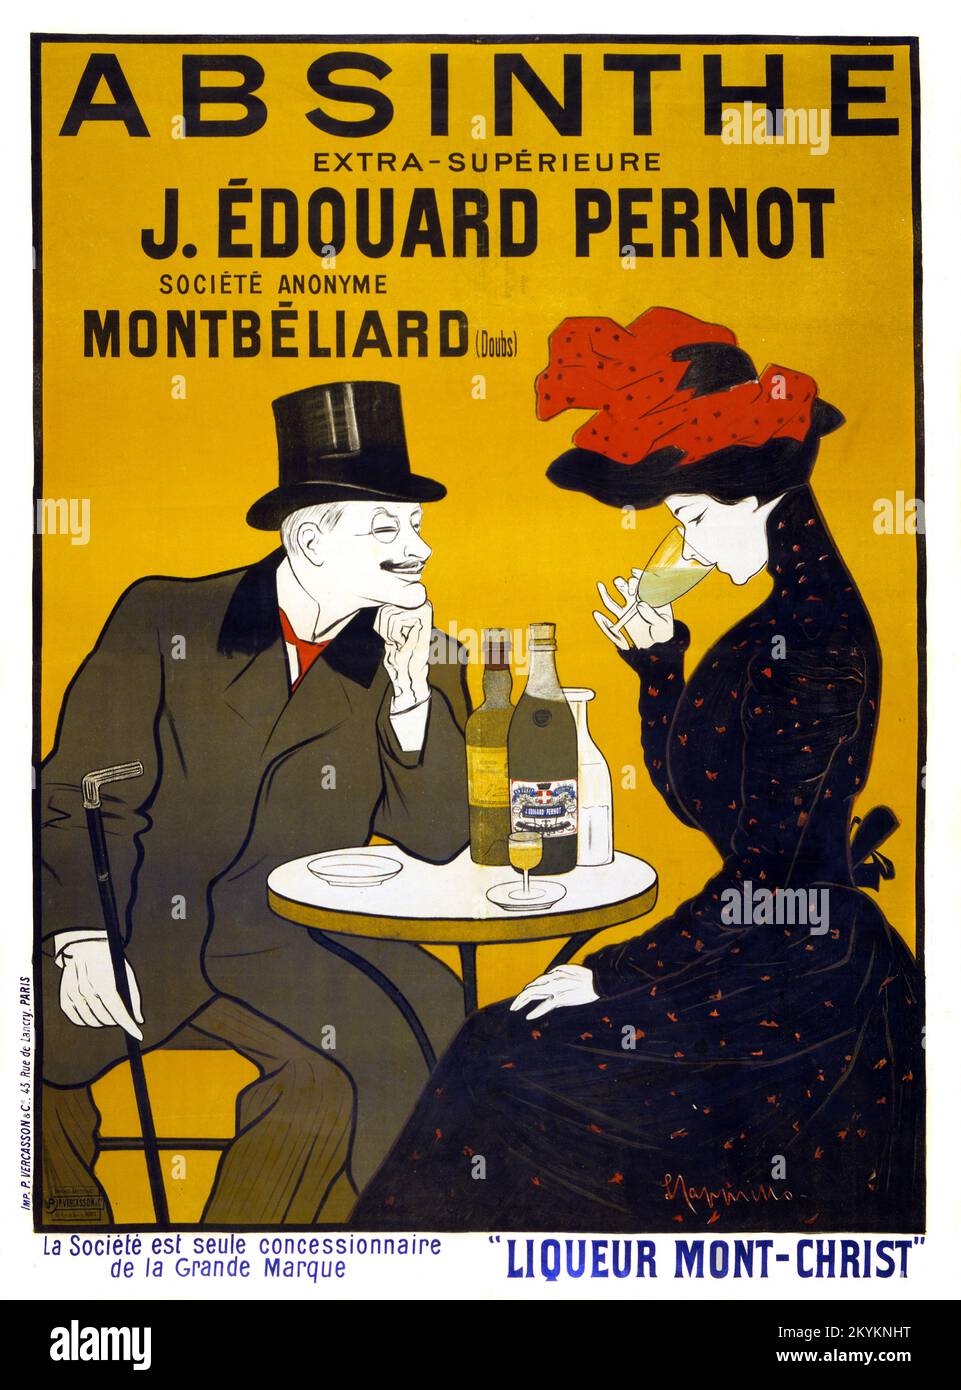 Absinthe. Extra-supérieure. J. Édouard Pernot by Leonetto Cappiello (1875-1942). Poster published in 1900 in France. Stock Photo